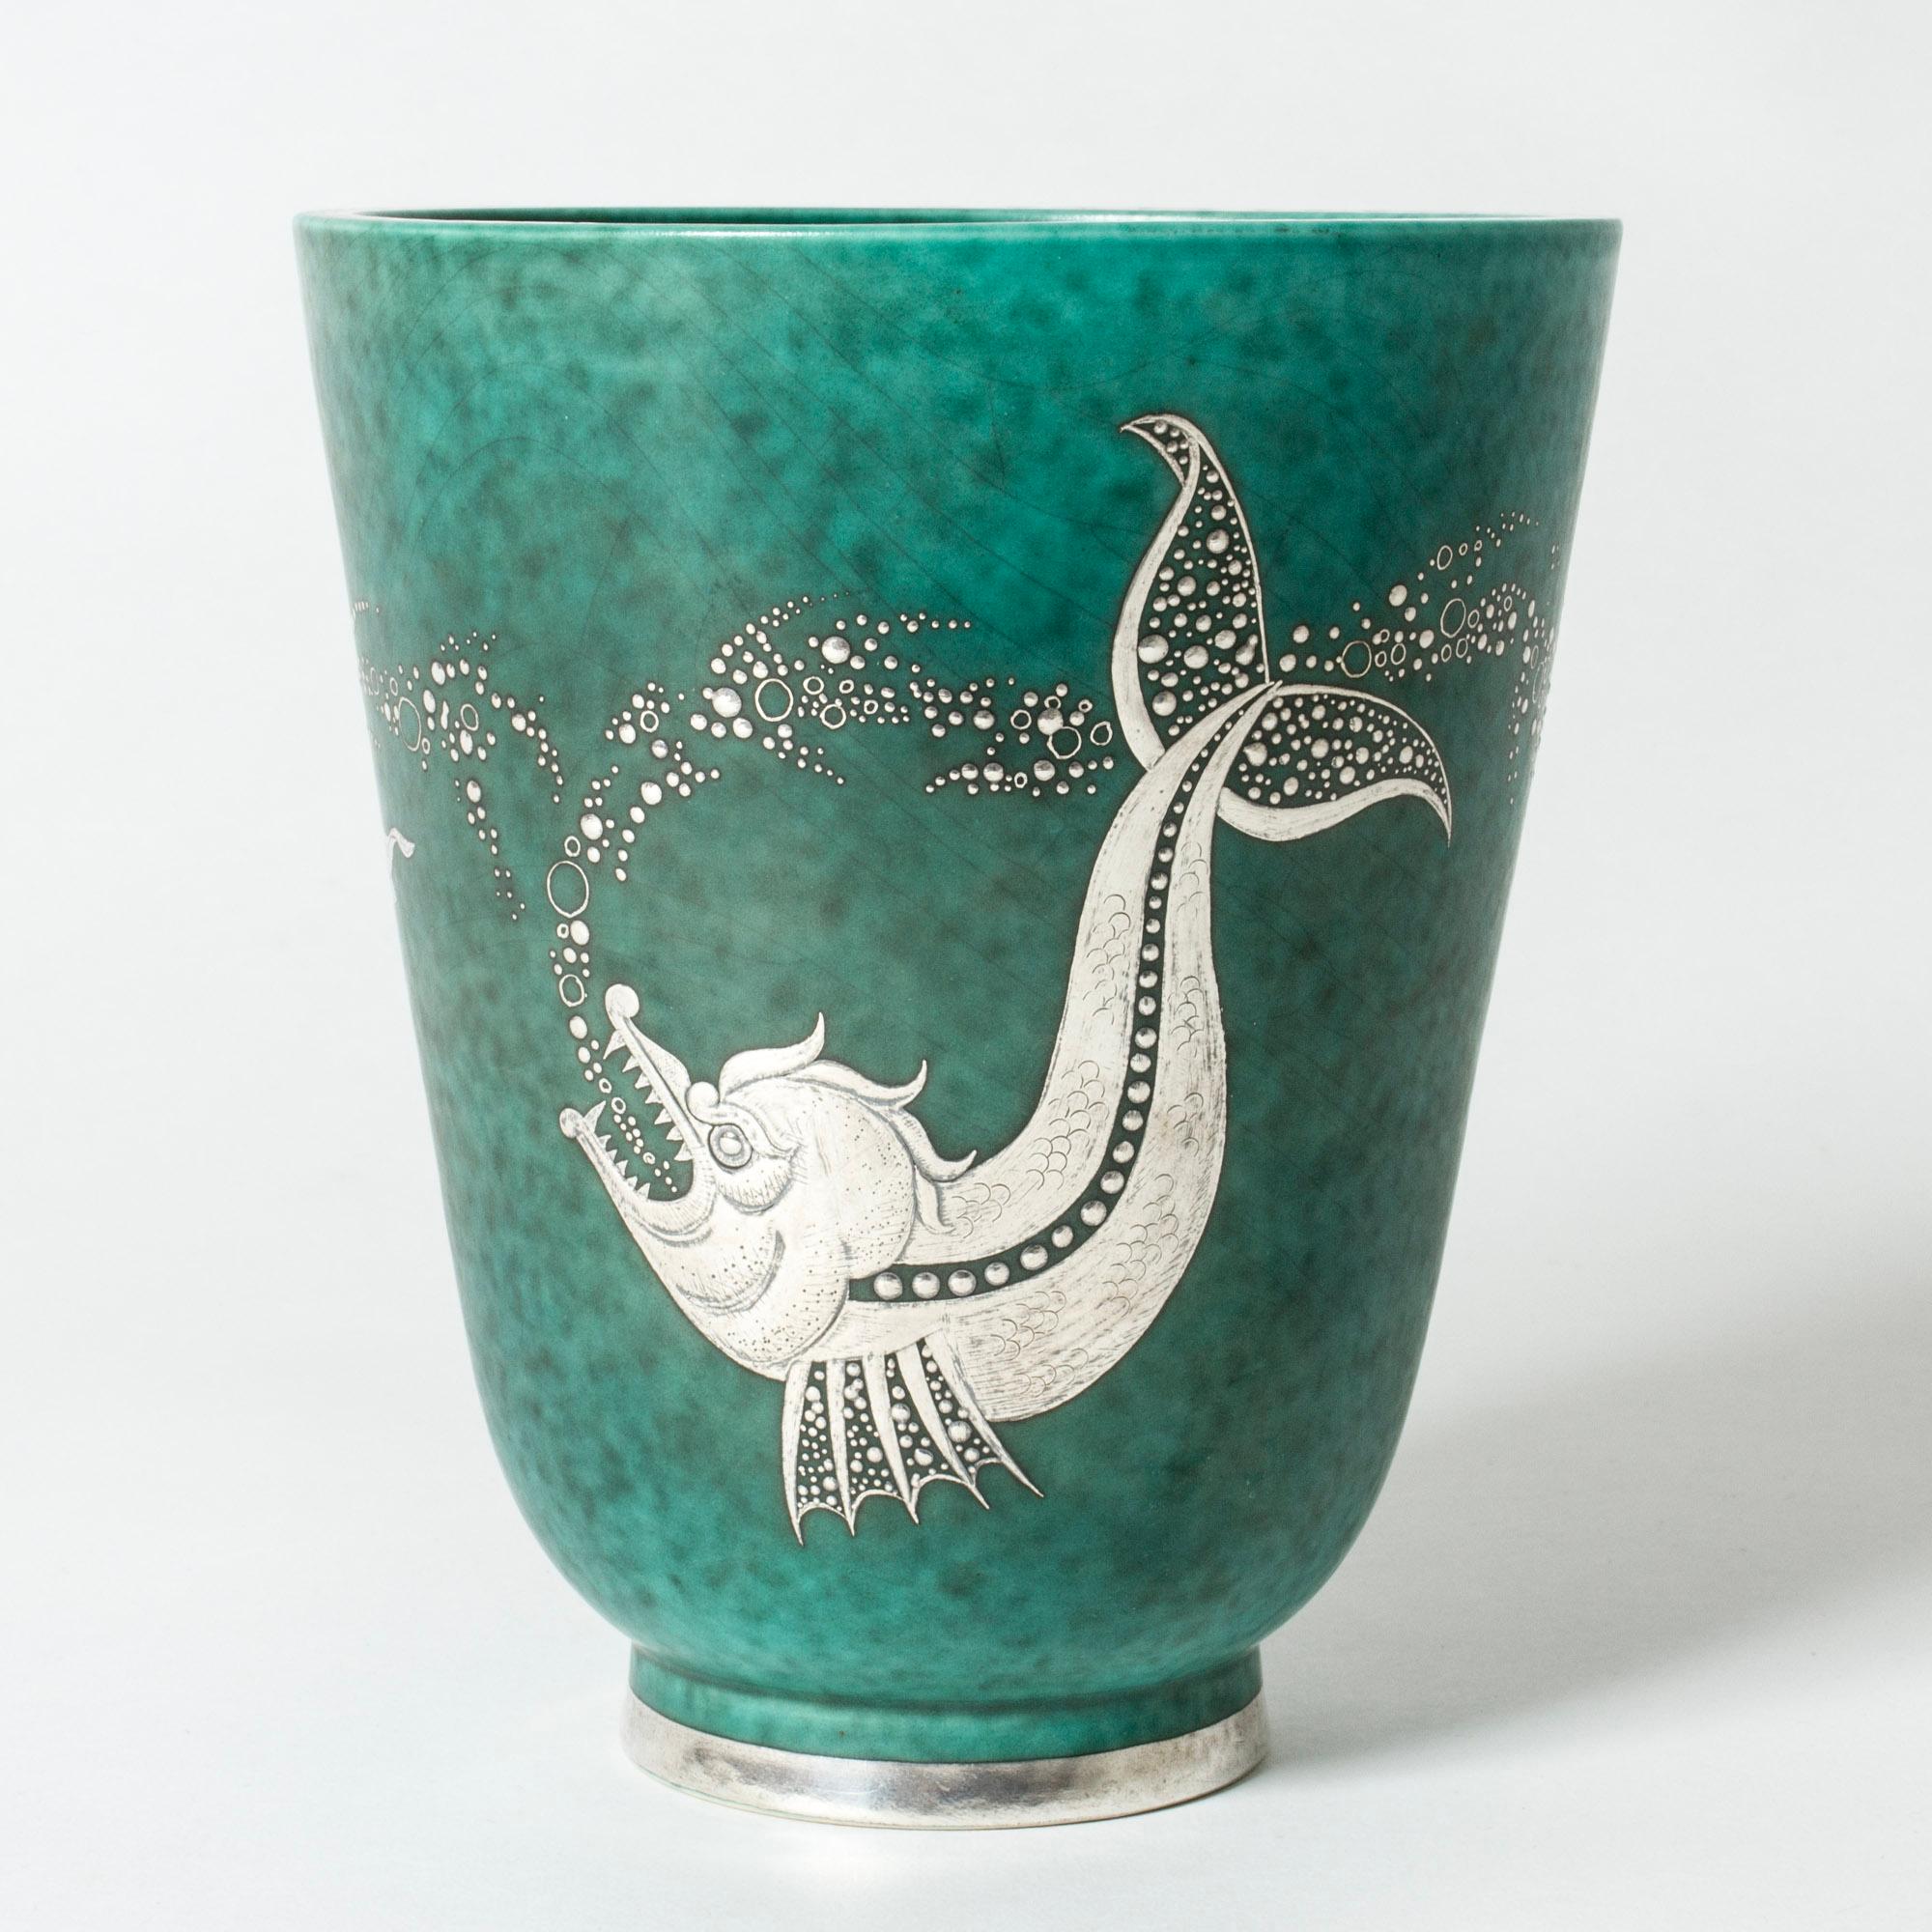 Stoneware “Argenta” vase by Wilhelm Kåge with beautiful silver decor of a big fish chasing a smaller fish, chasing a smaller fish. Lovely attention to every detail, scales and bubbles.

“Argenta” was introduced at the Stockholm exhibition in 1930